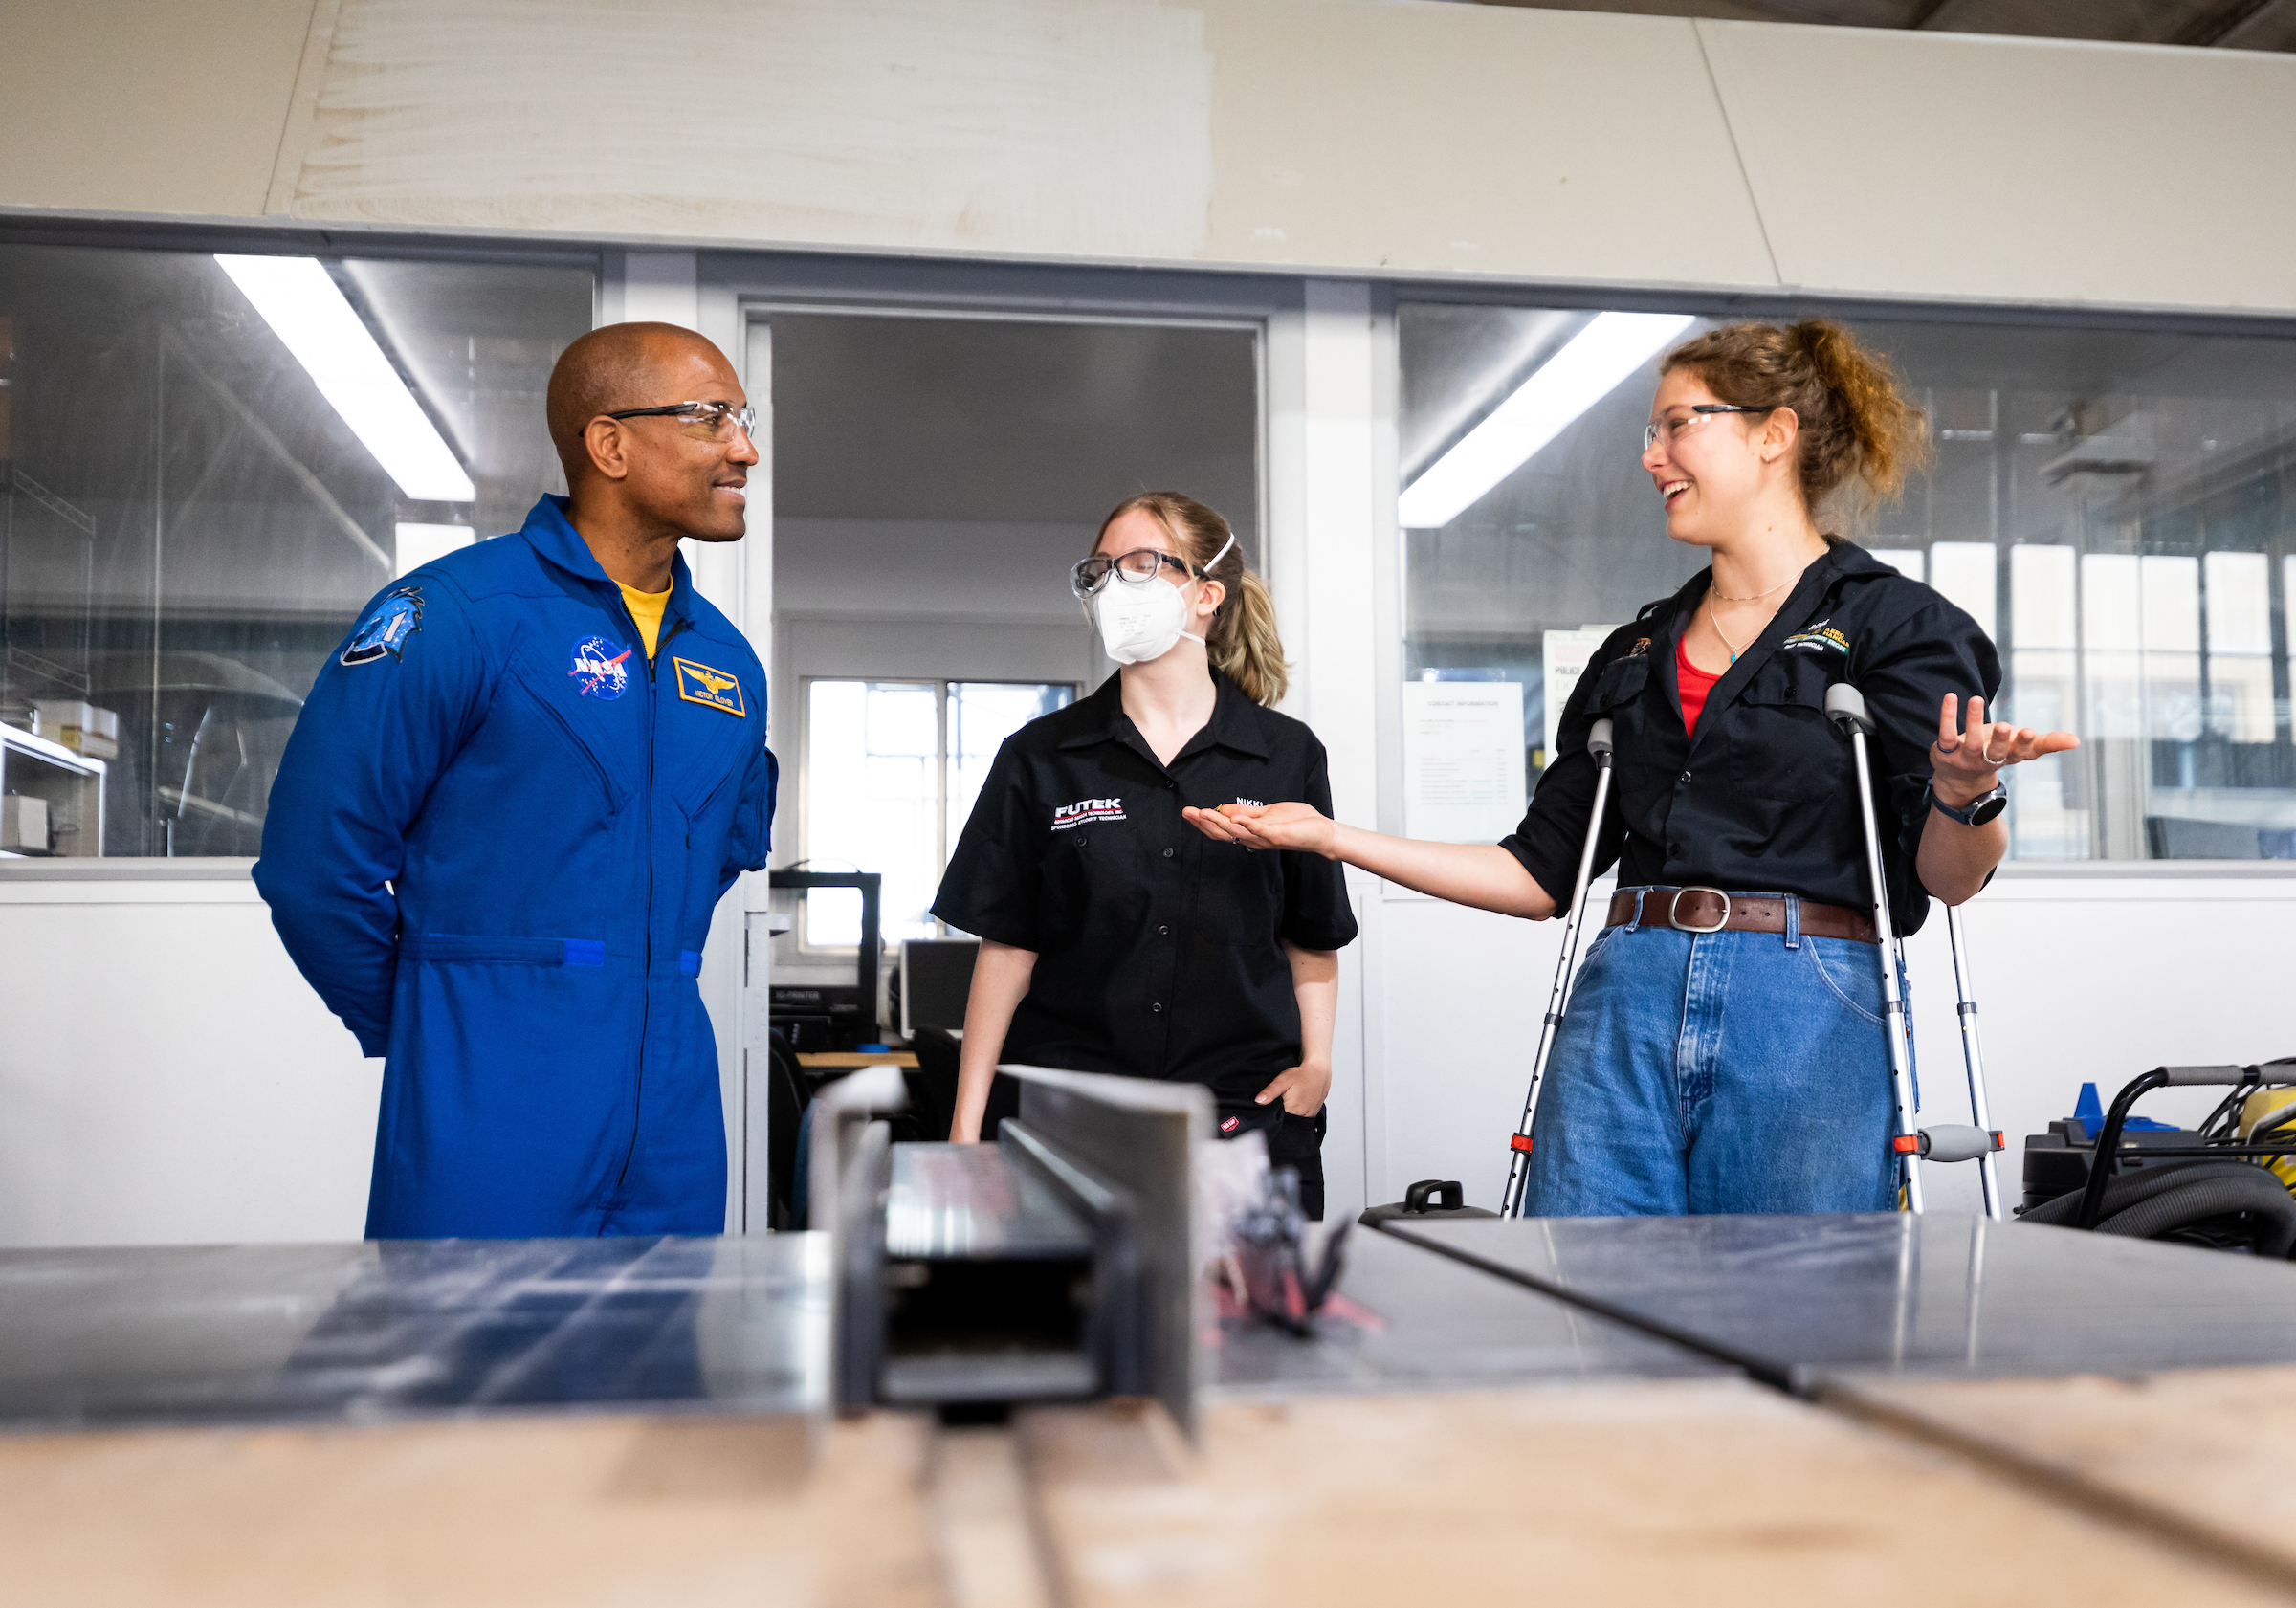 Alumnus Victor Glover visits with two female students at the Cal Poly Aero Hanger Machine Shop during his visit to campus in April.